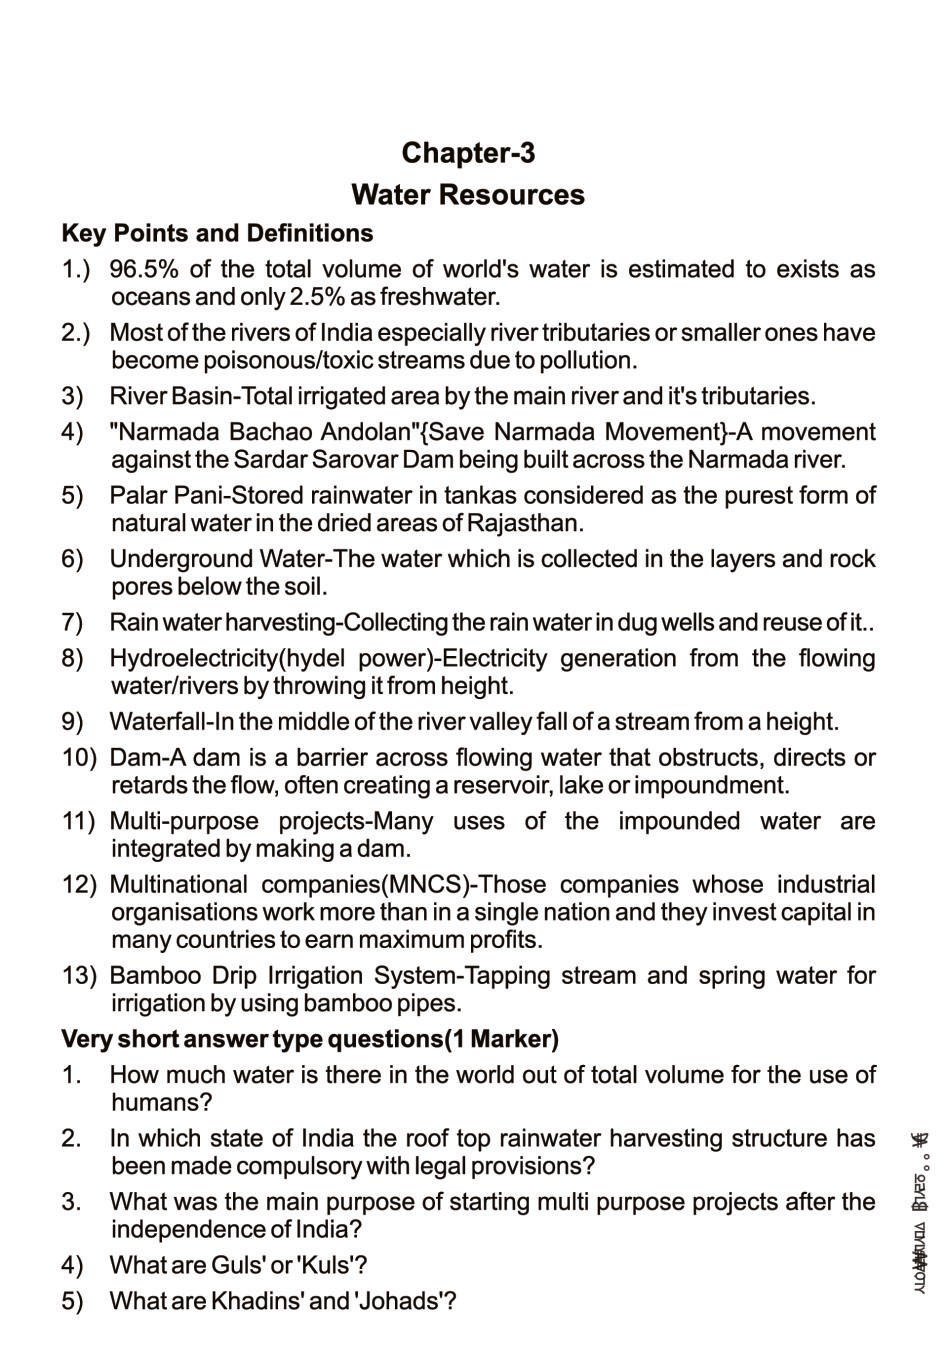 assignment on water resources for class 10